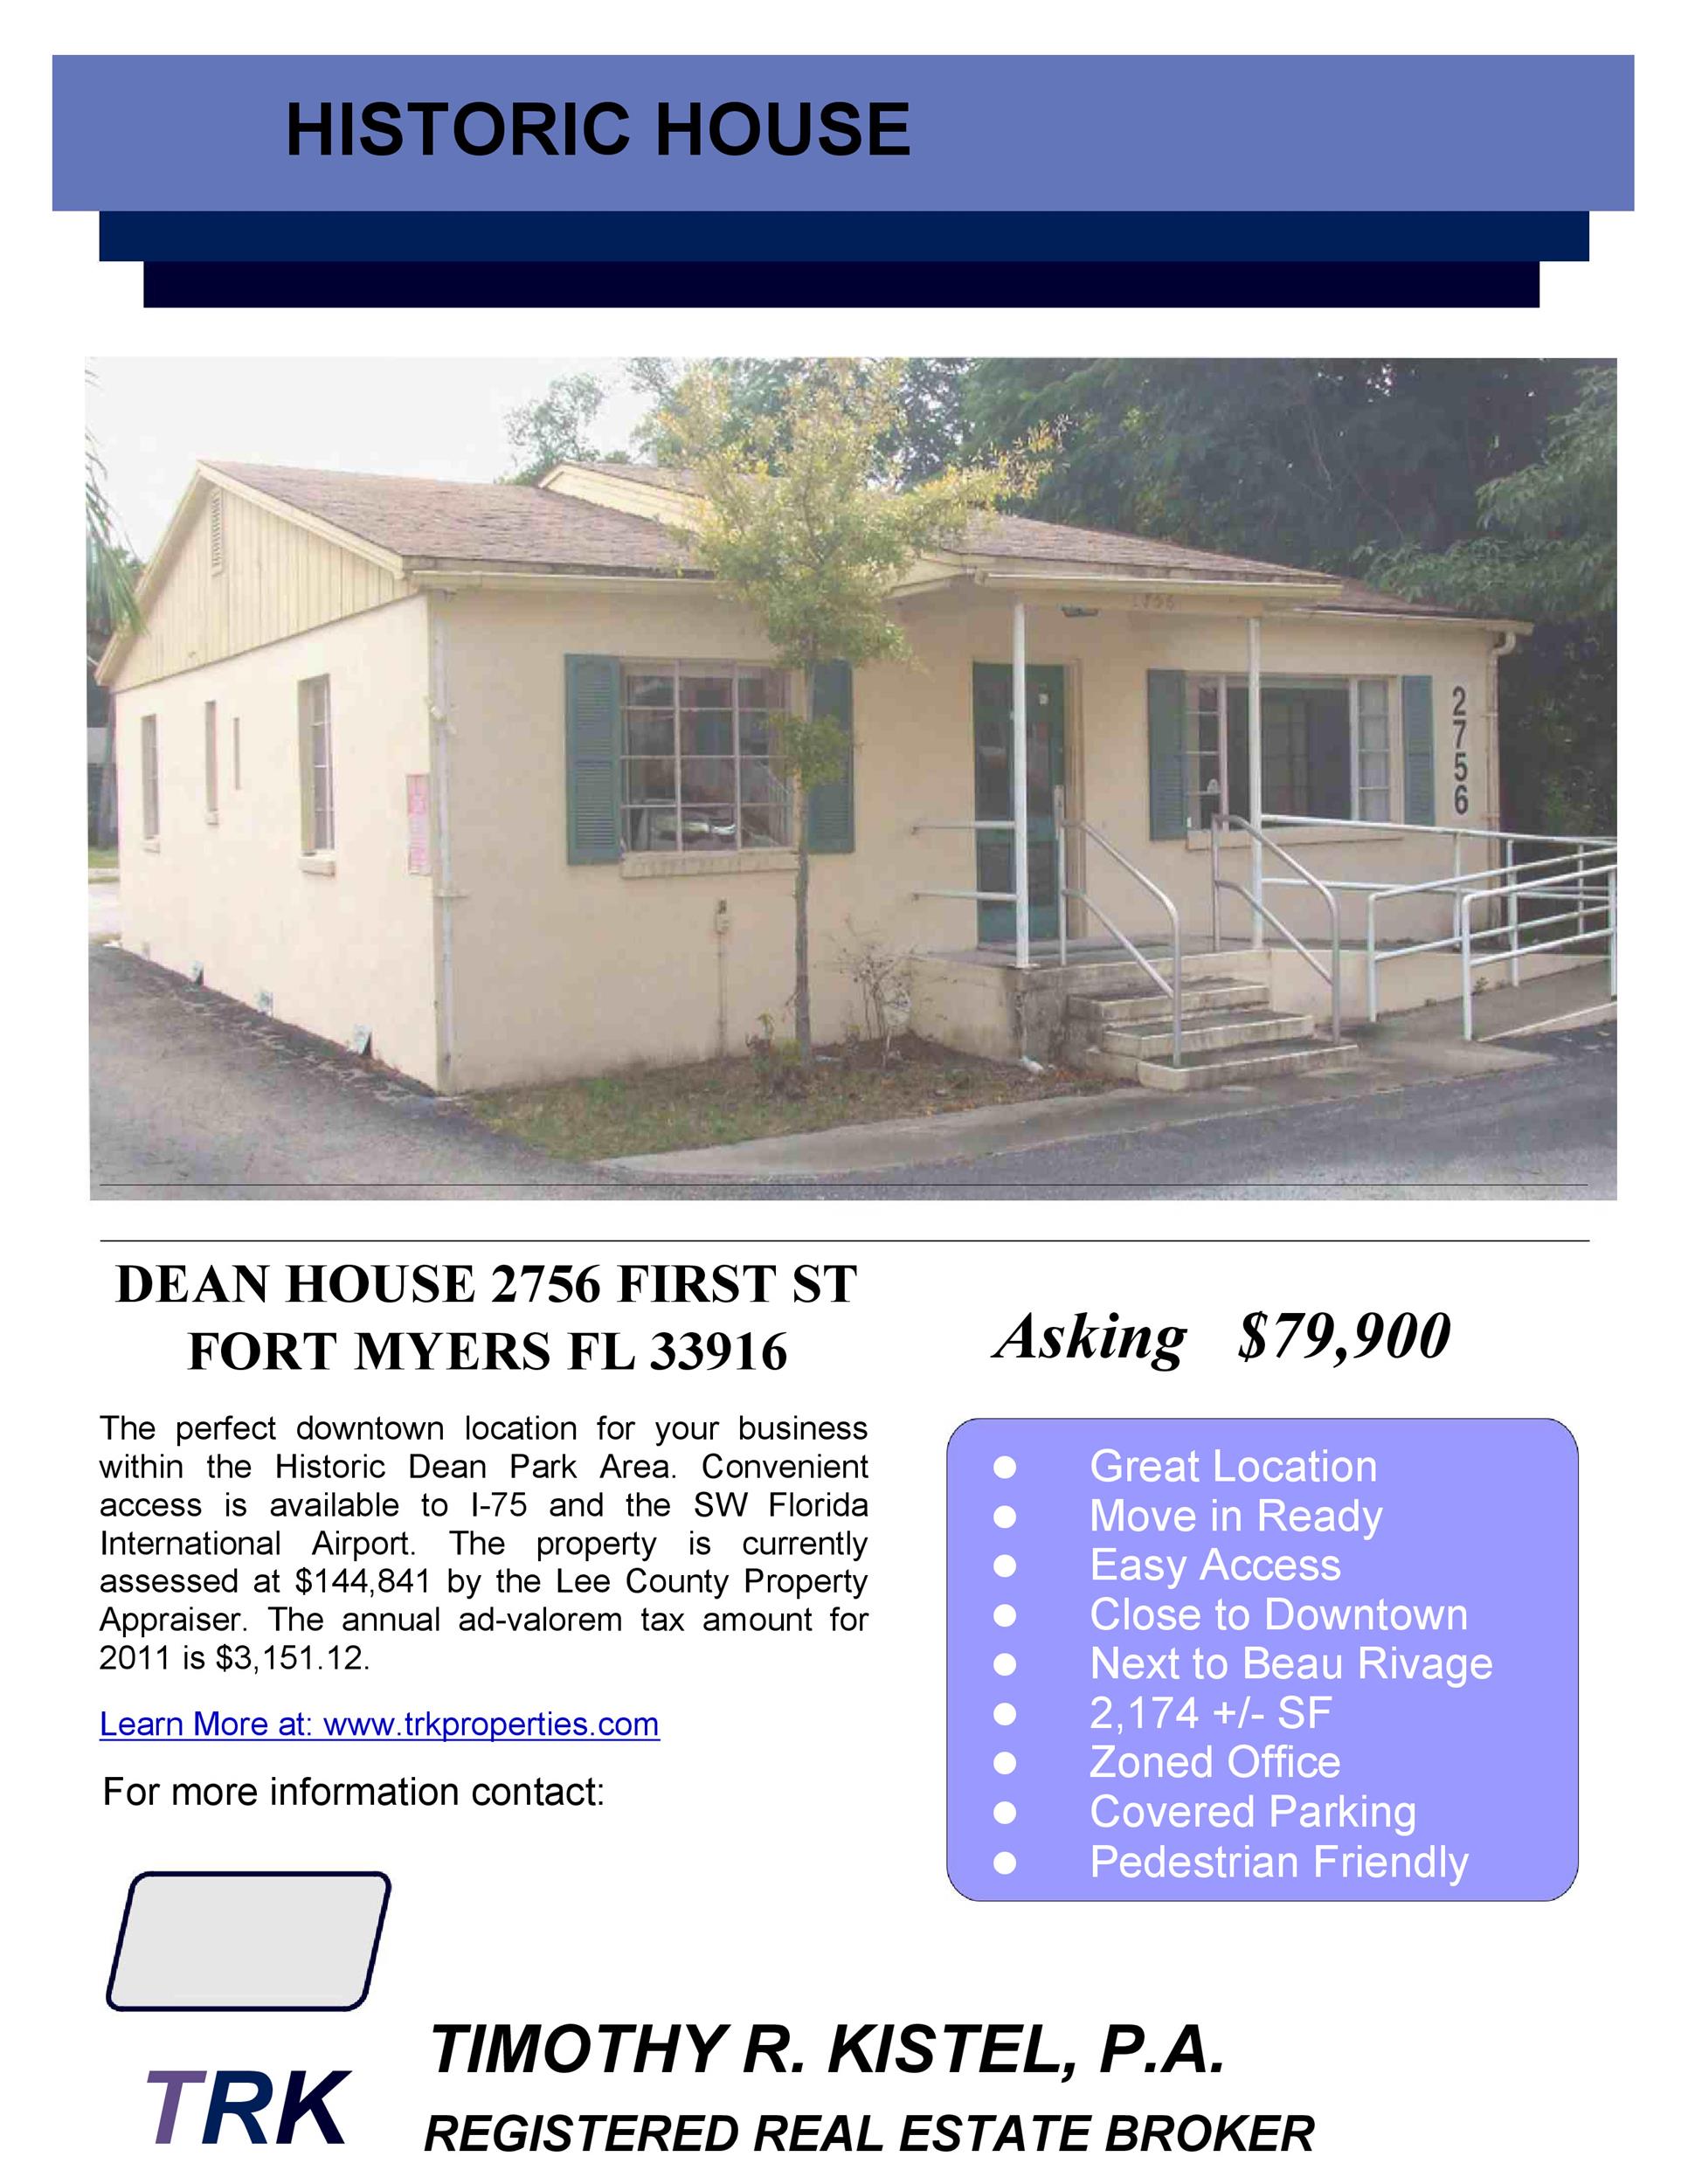 Free house for sale flyer 27